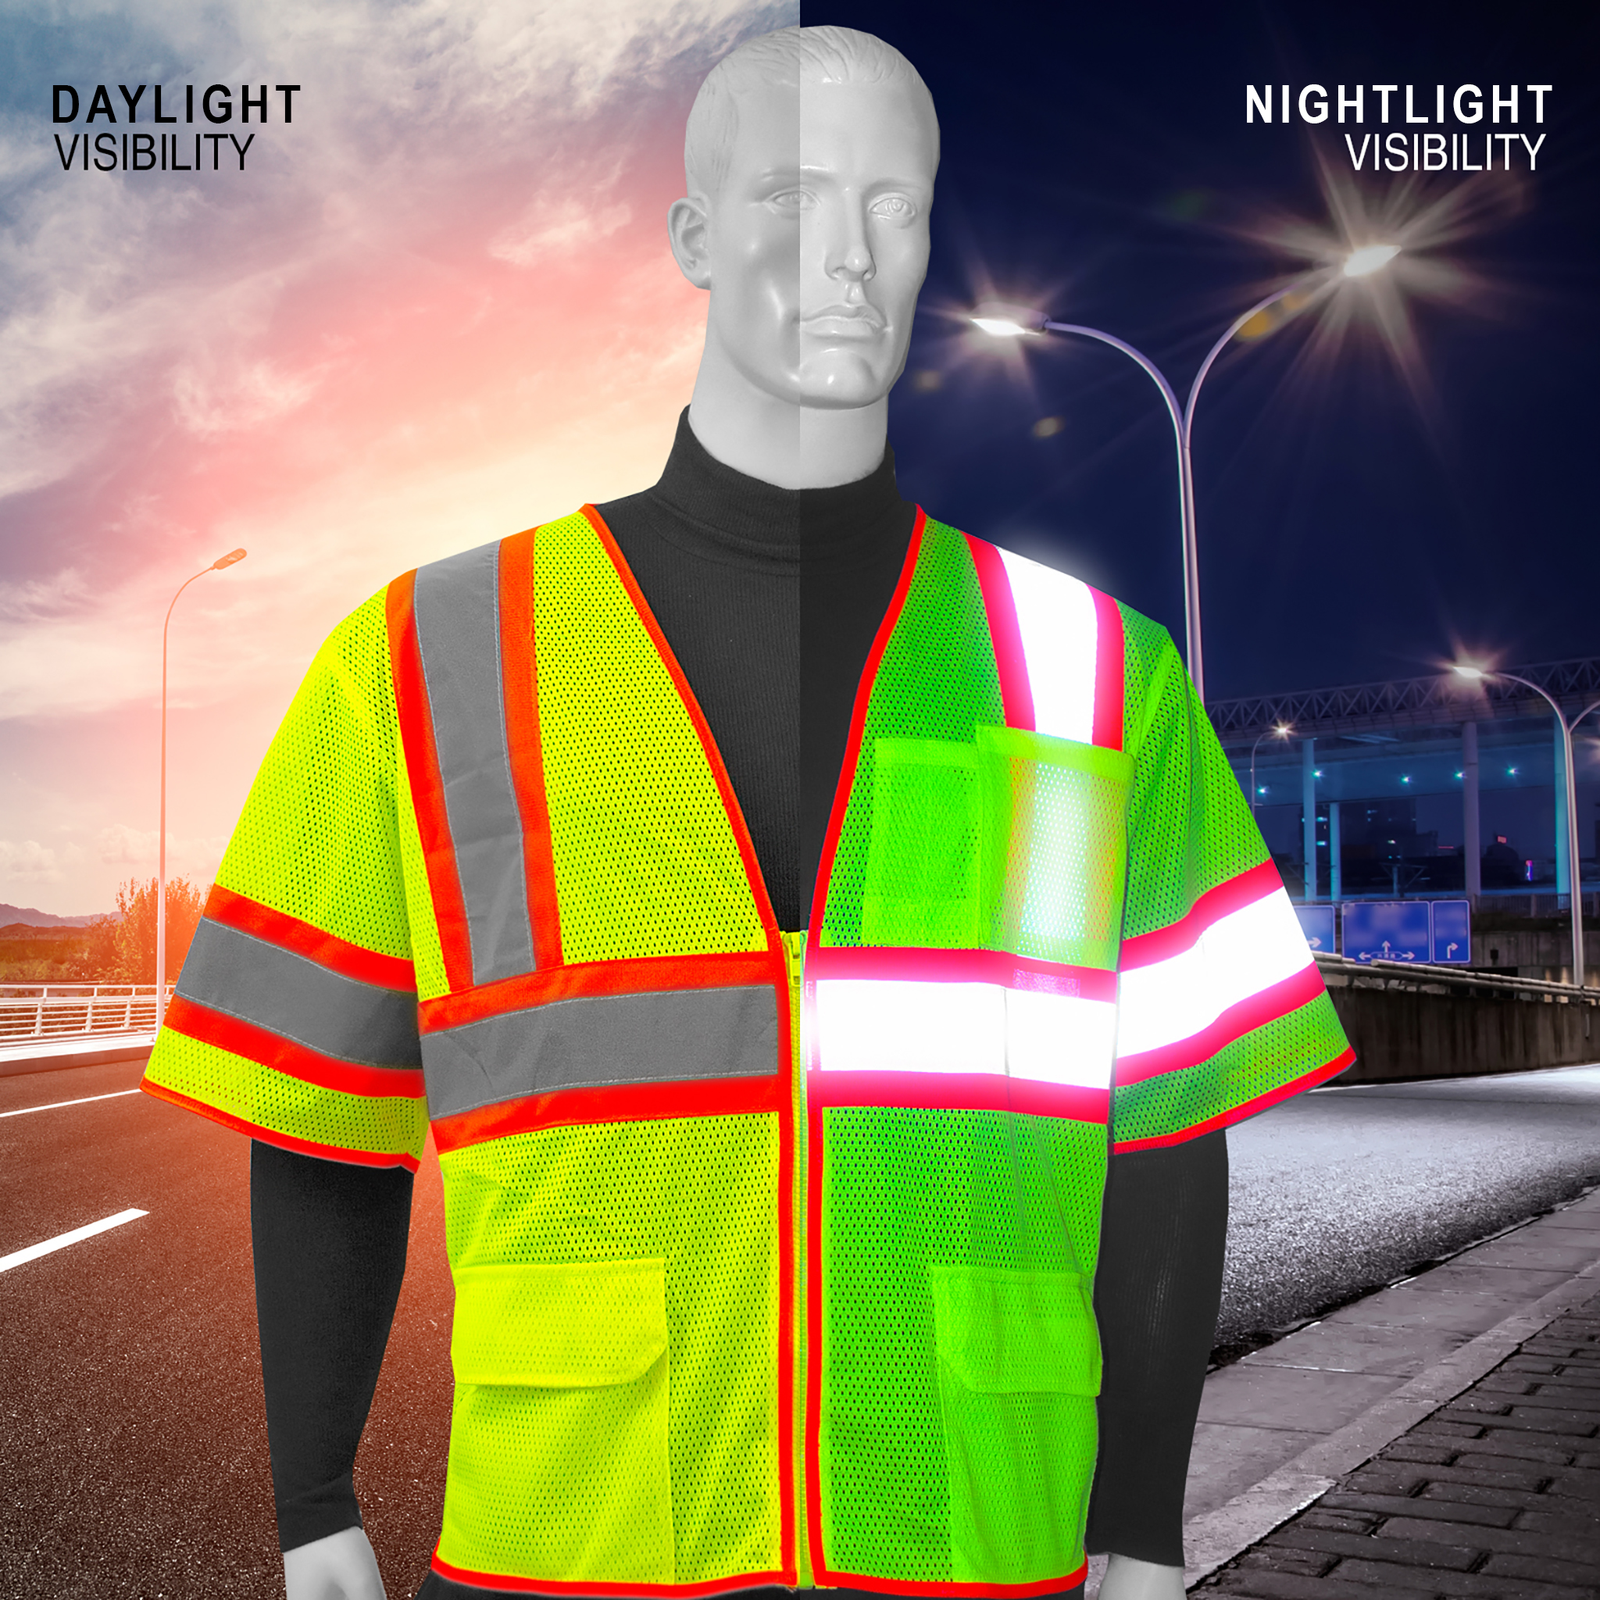 Mannequin wearing a lime Jorestech safety vest comparing how bright it looks during day and night time